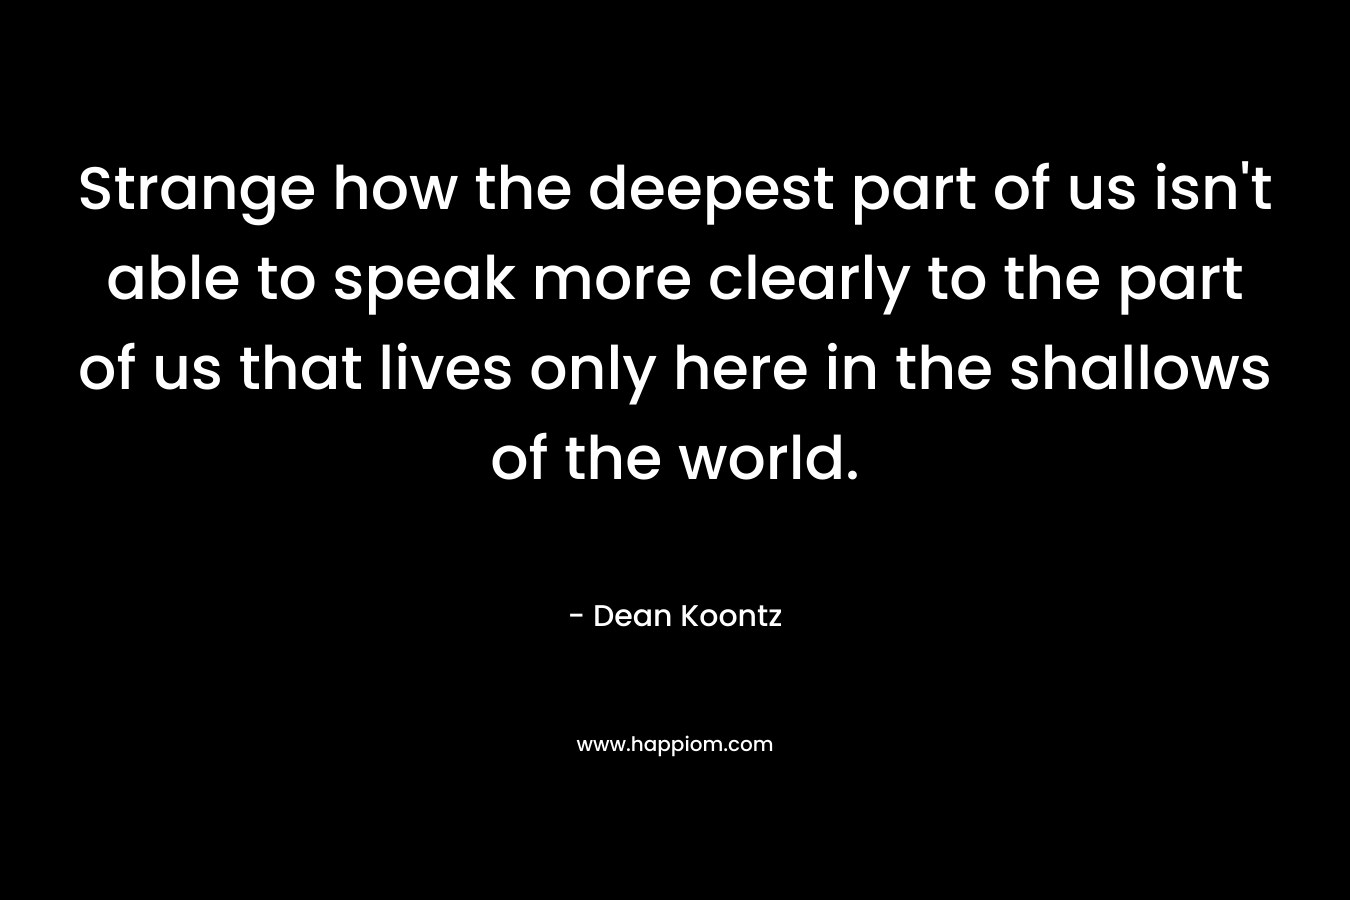 Strange how the deepest part of us isn't able to speak more clearly to the part of us that lives only here in the shallows of the world.